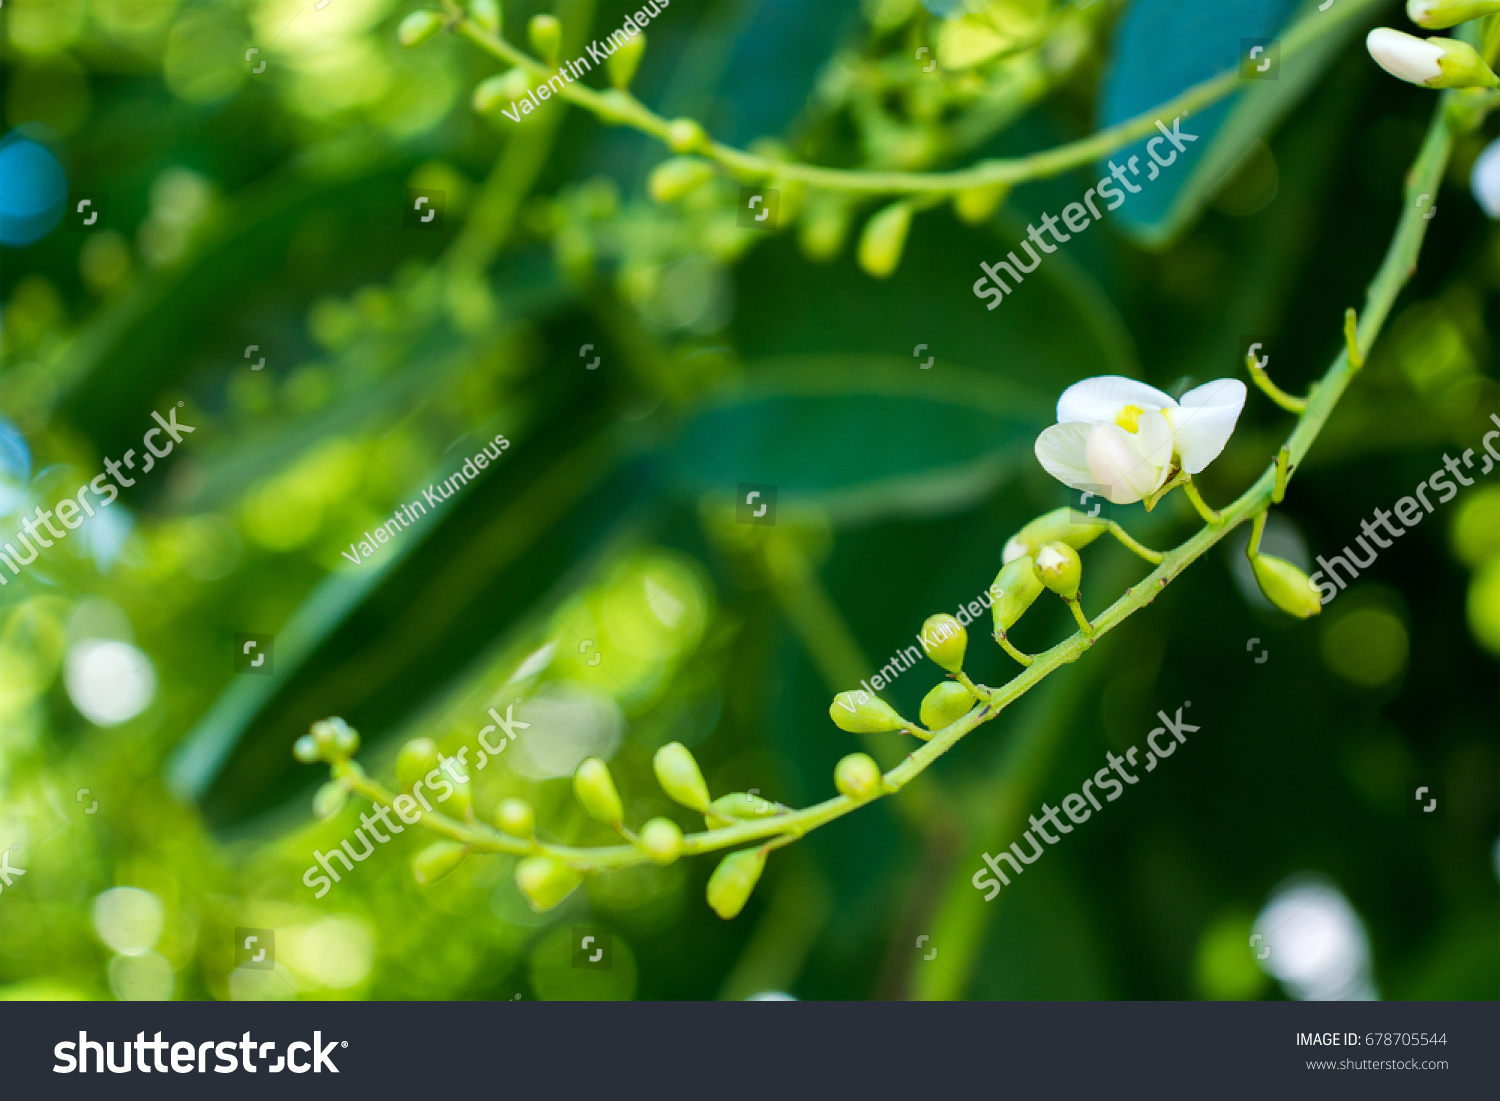 Sophora japonica tree. tree leaves. Acacia. Sophora japonica flowers. Blurred Background of green leaves. #678705544